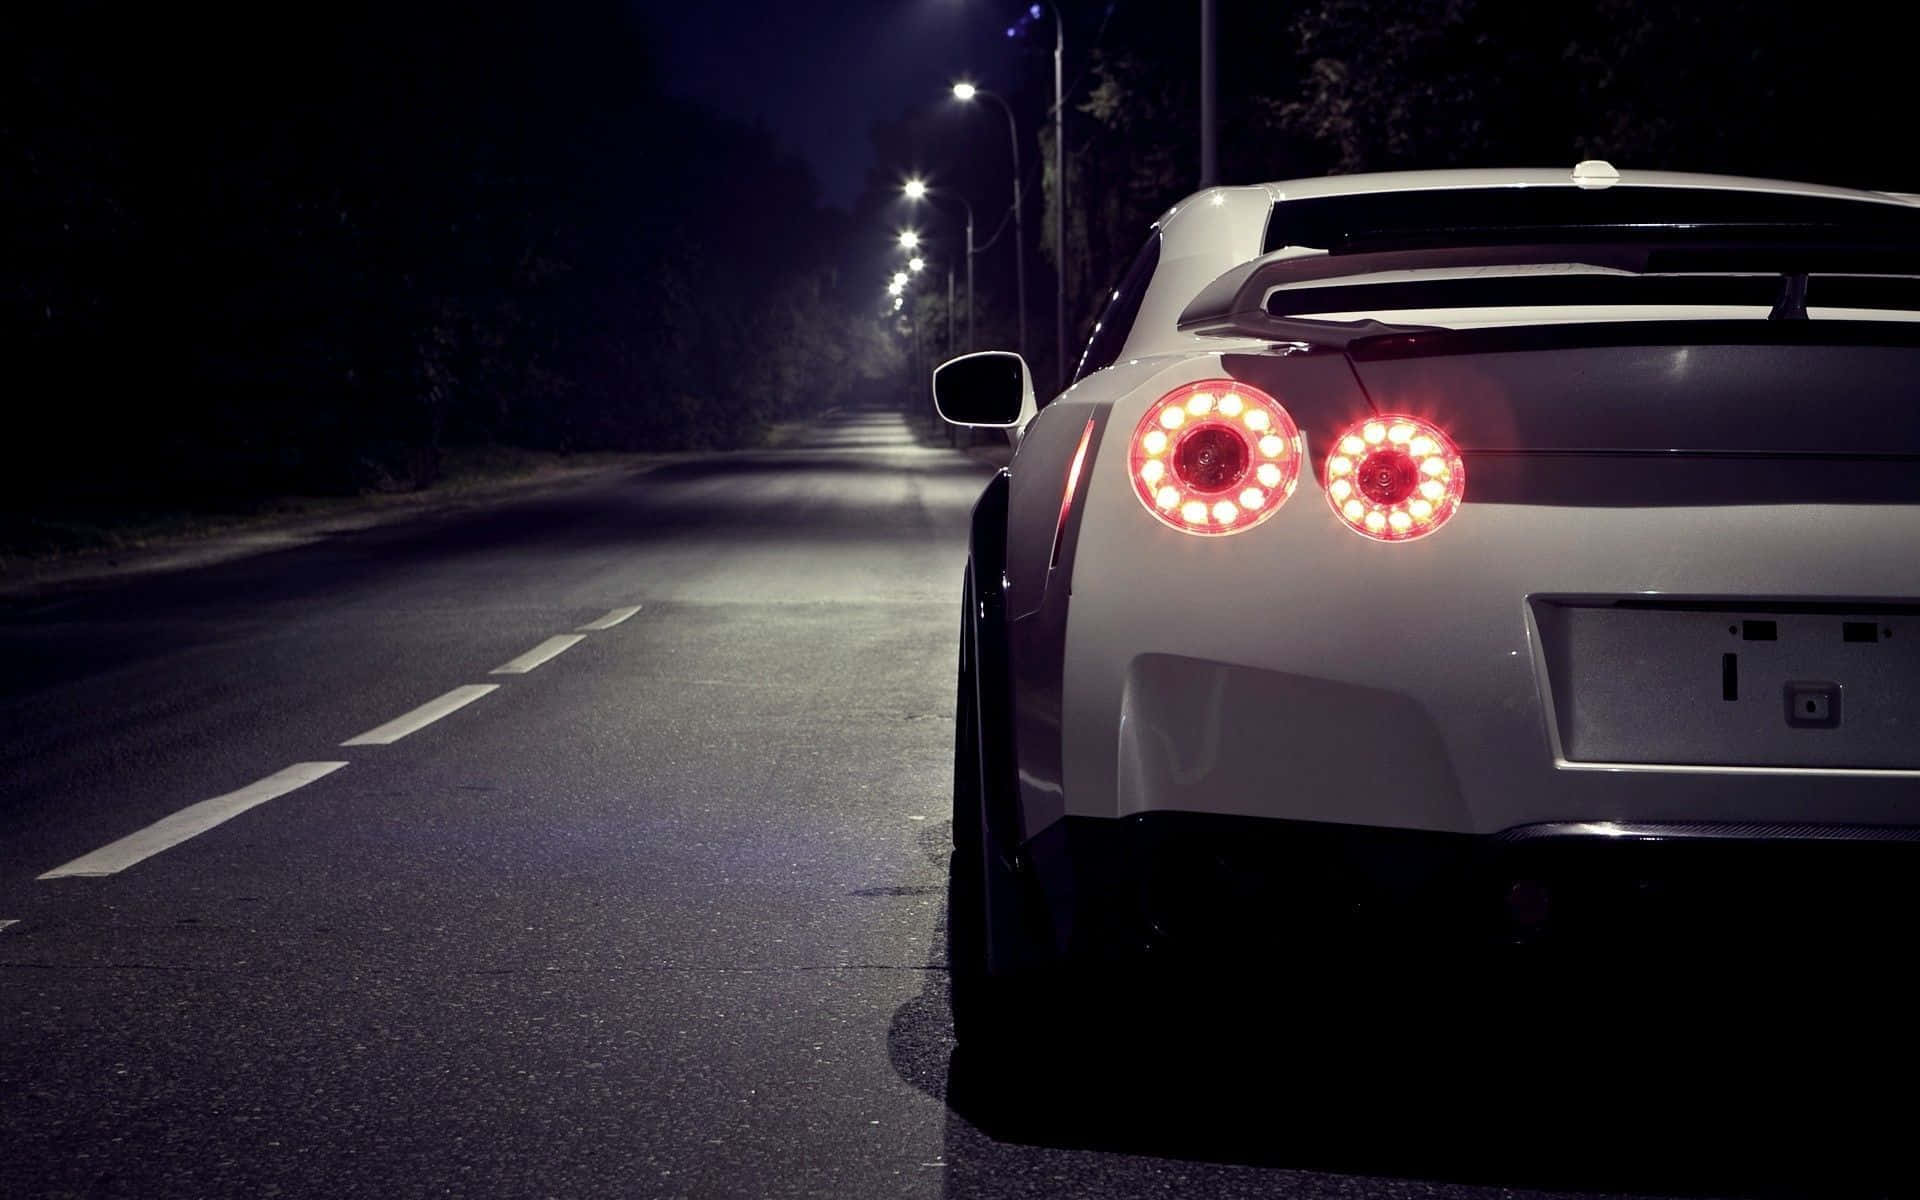 Get Cool & Stylish In The Nissan Gtr